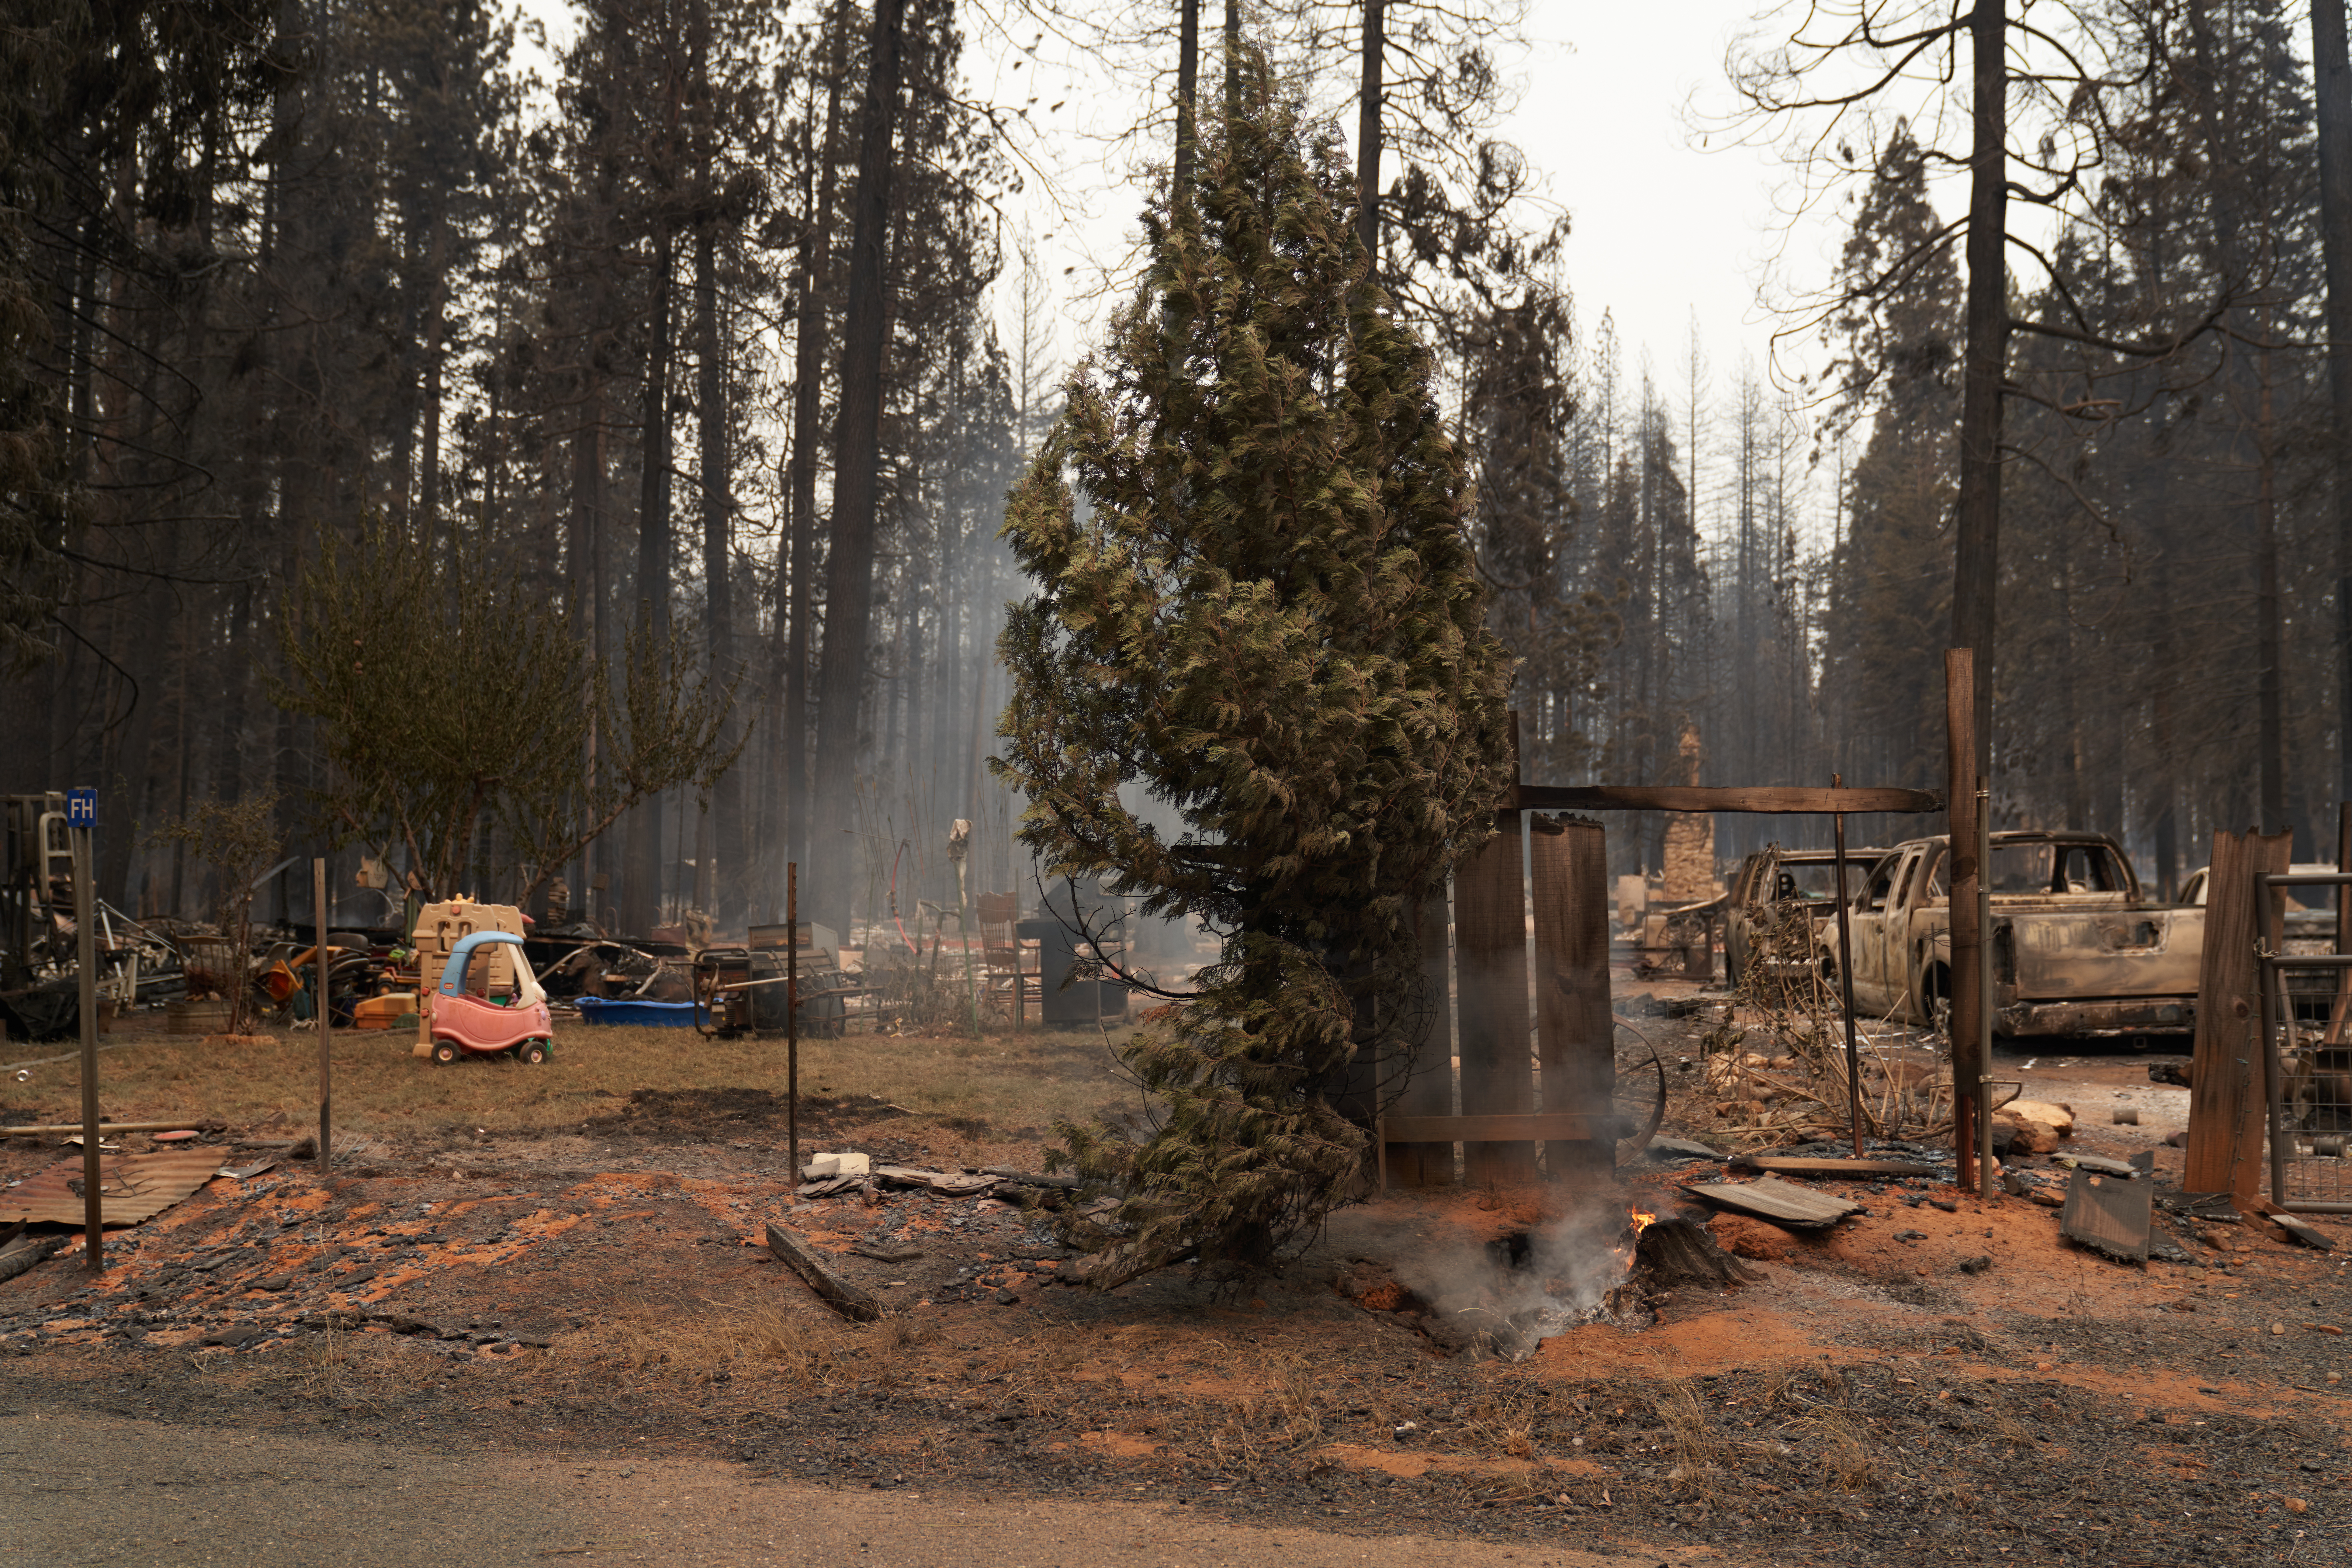 GRIZZLY FLATS, CA - AUGUST 18: A residential home is burnt with a child's toy car still intact on August 18, 2021 in Grizzly Flats, California. The Caldor Fire raged without containment through rugged forested areas of El Dorado County destroying structures as it grew to over 50,000 acres. (Photo by Allison Dinner/Getty Images)